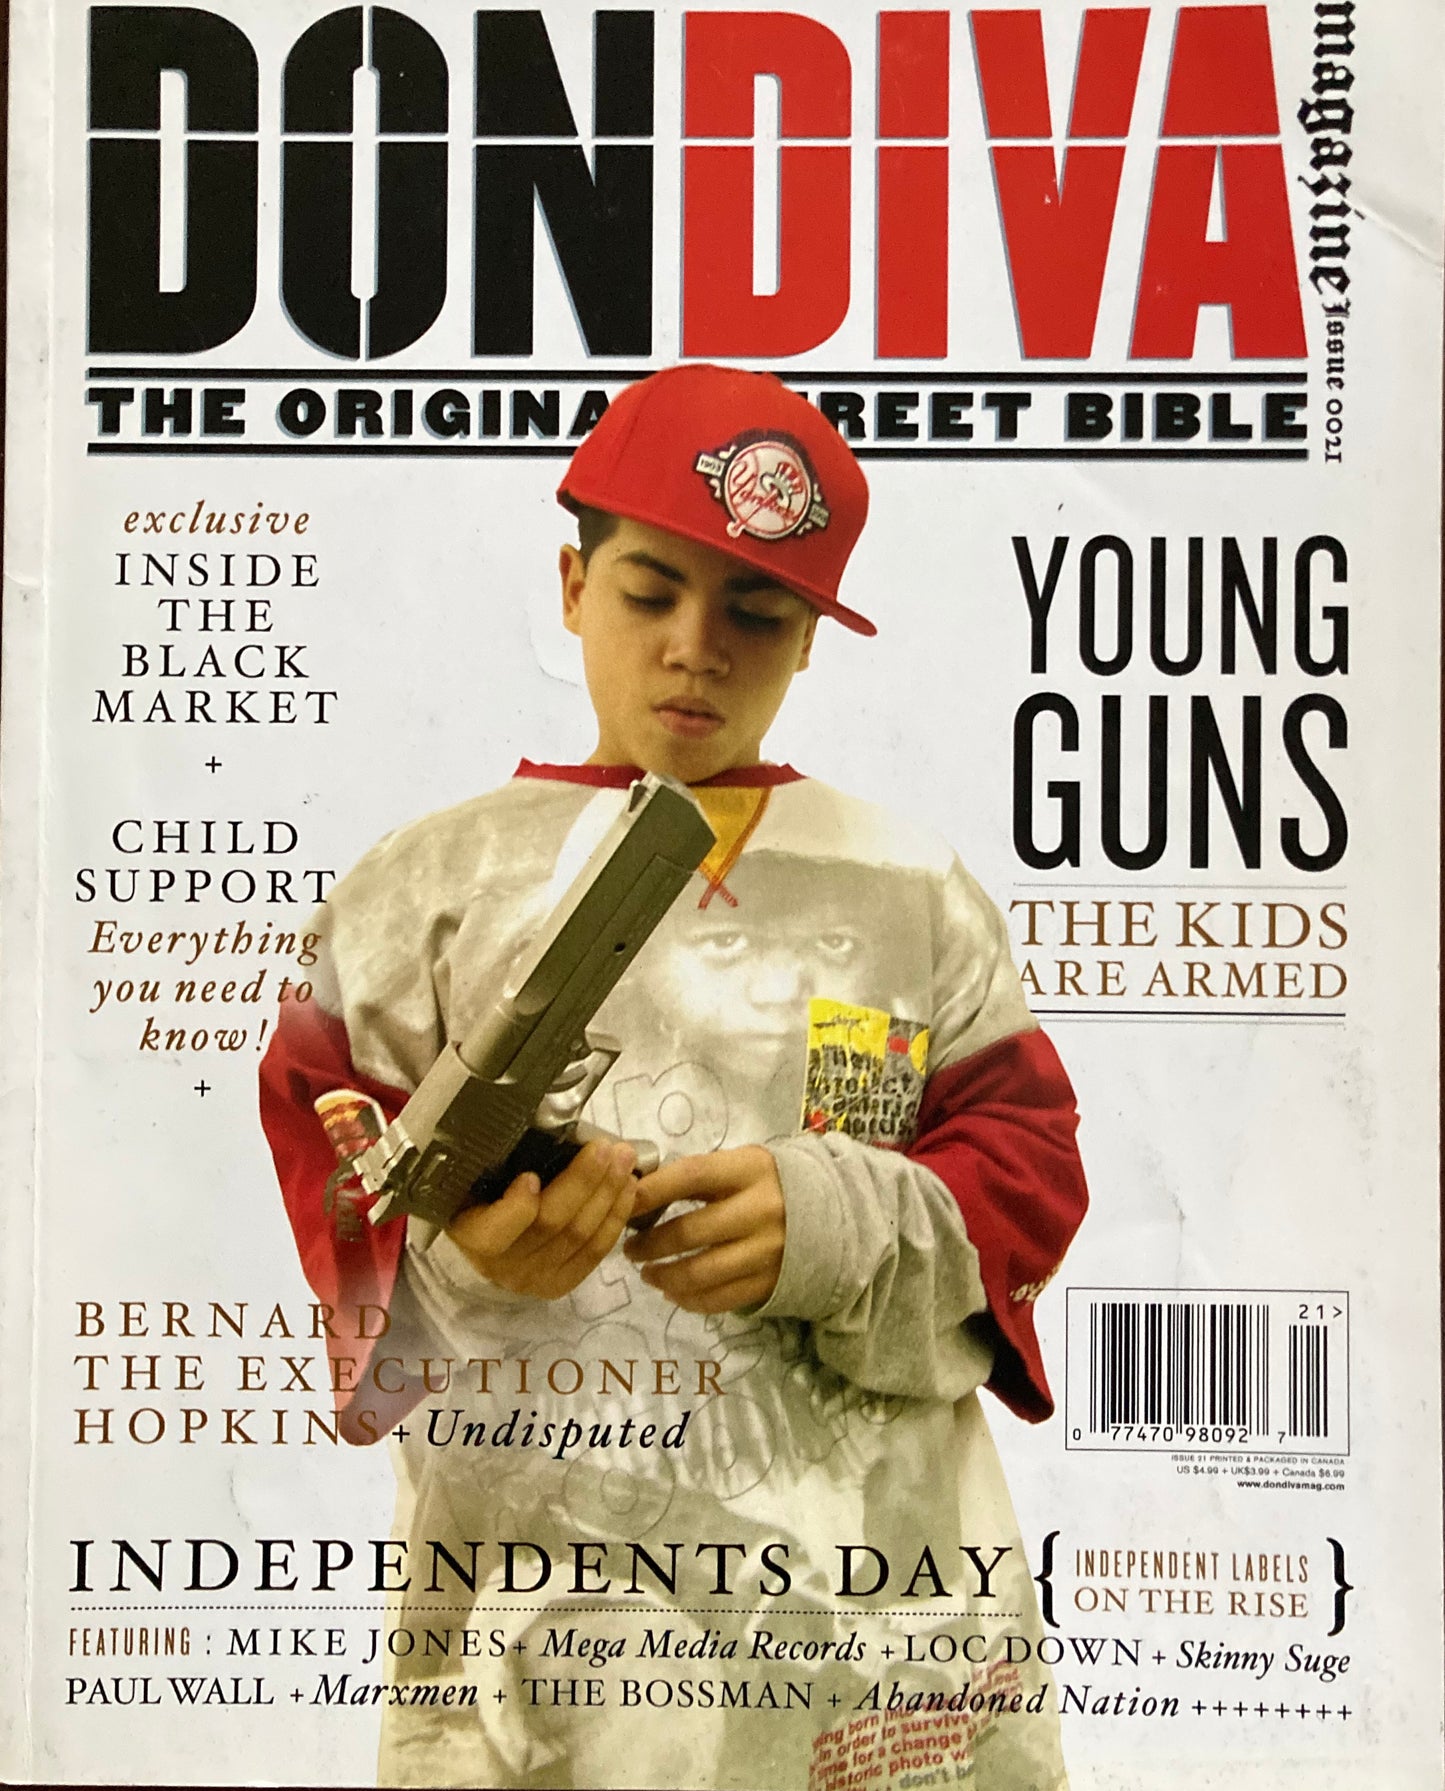 Don Diva Magazine Issue 0021 Young Guns - MoSneaks Shop Online